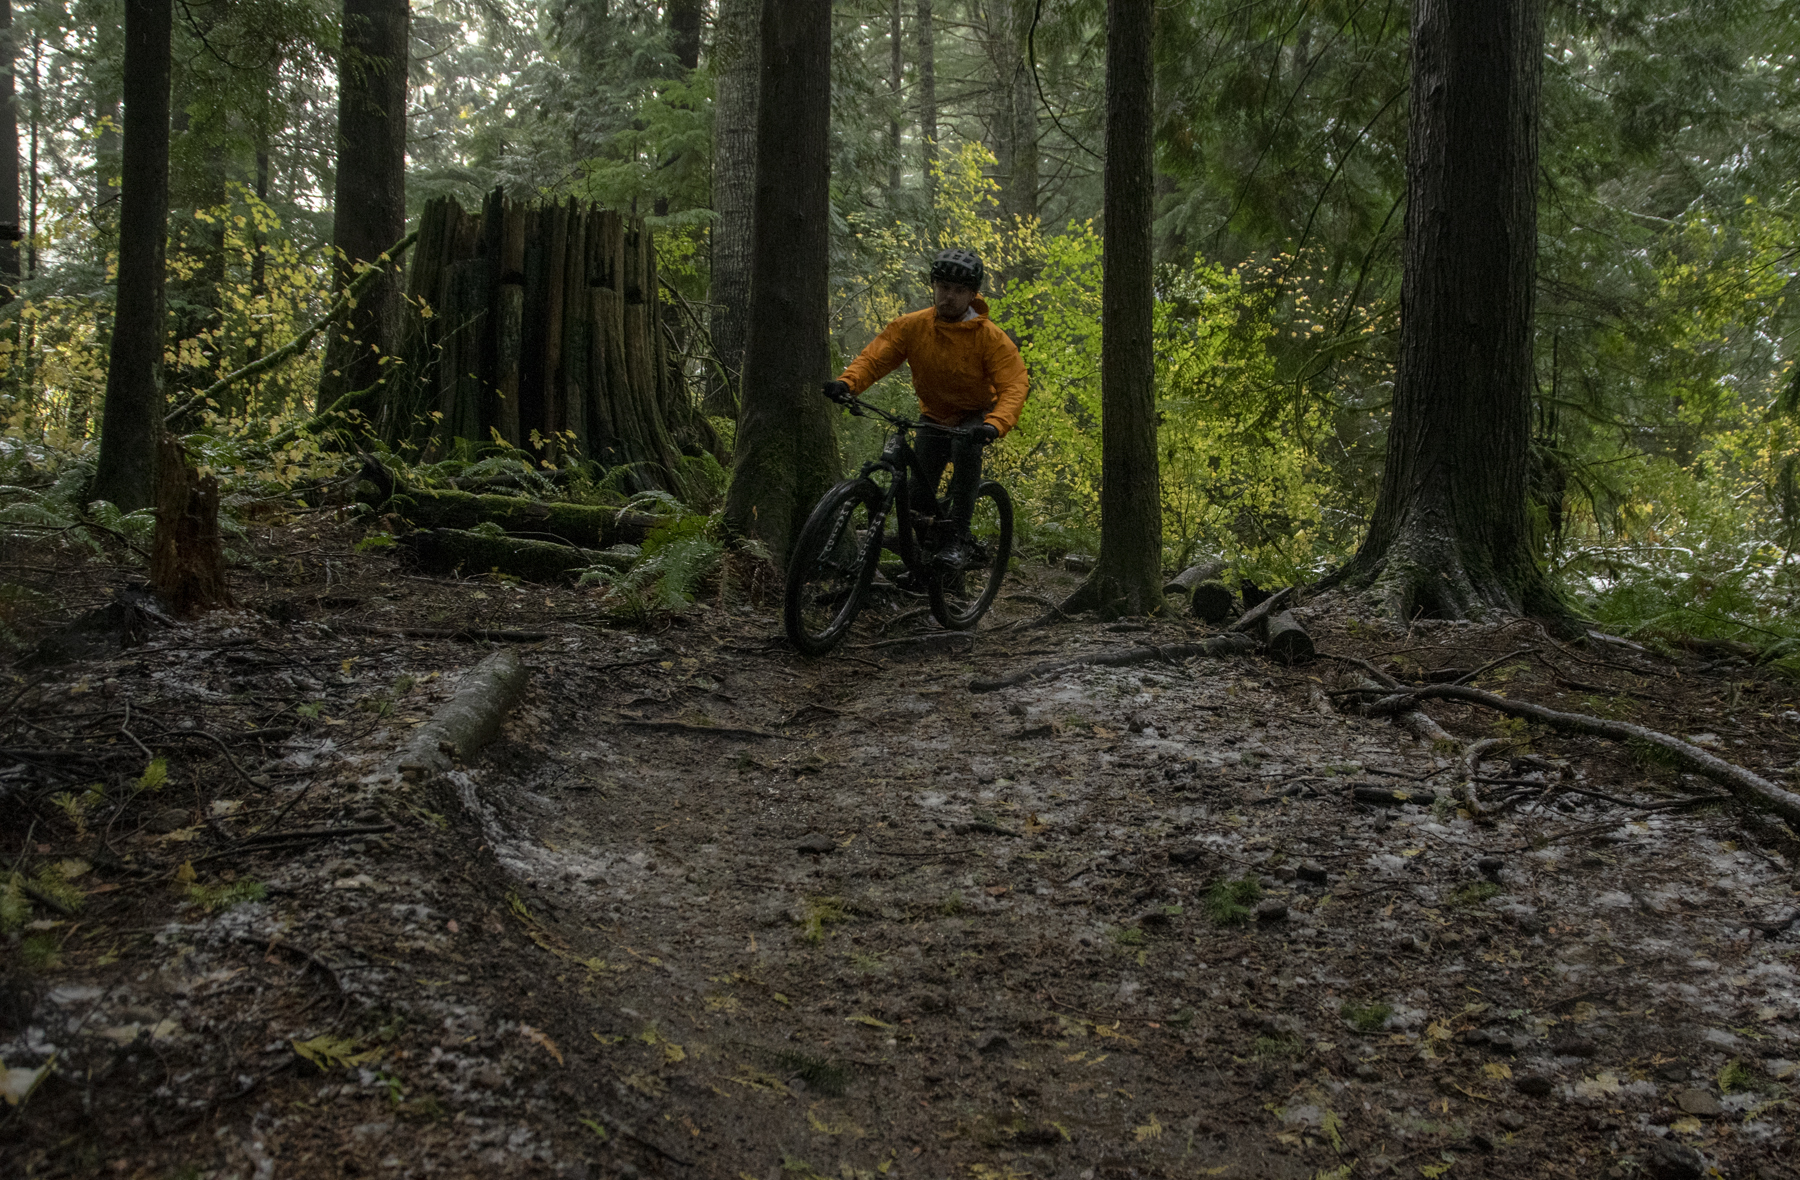 David Golay reviews the Reynolds Blacklabel 329 Trail Pro Wheels for Blister